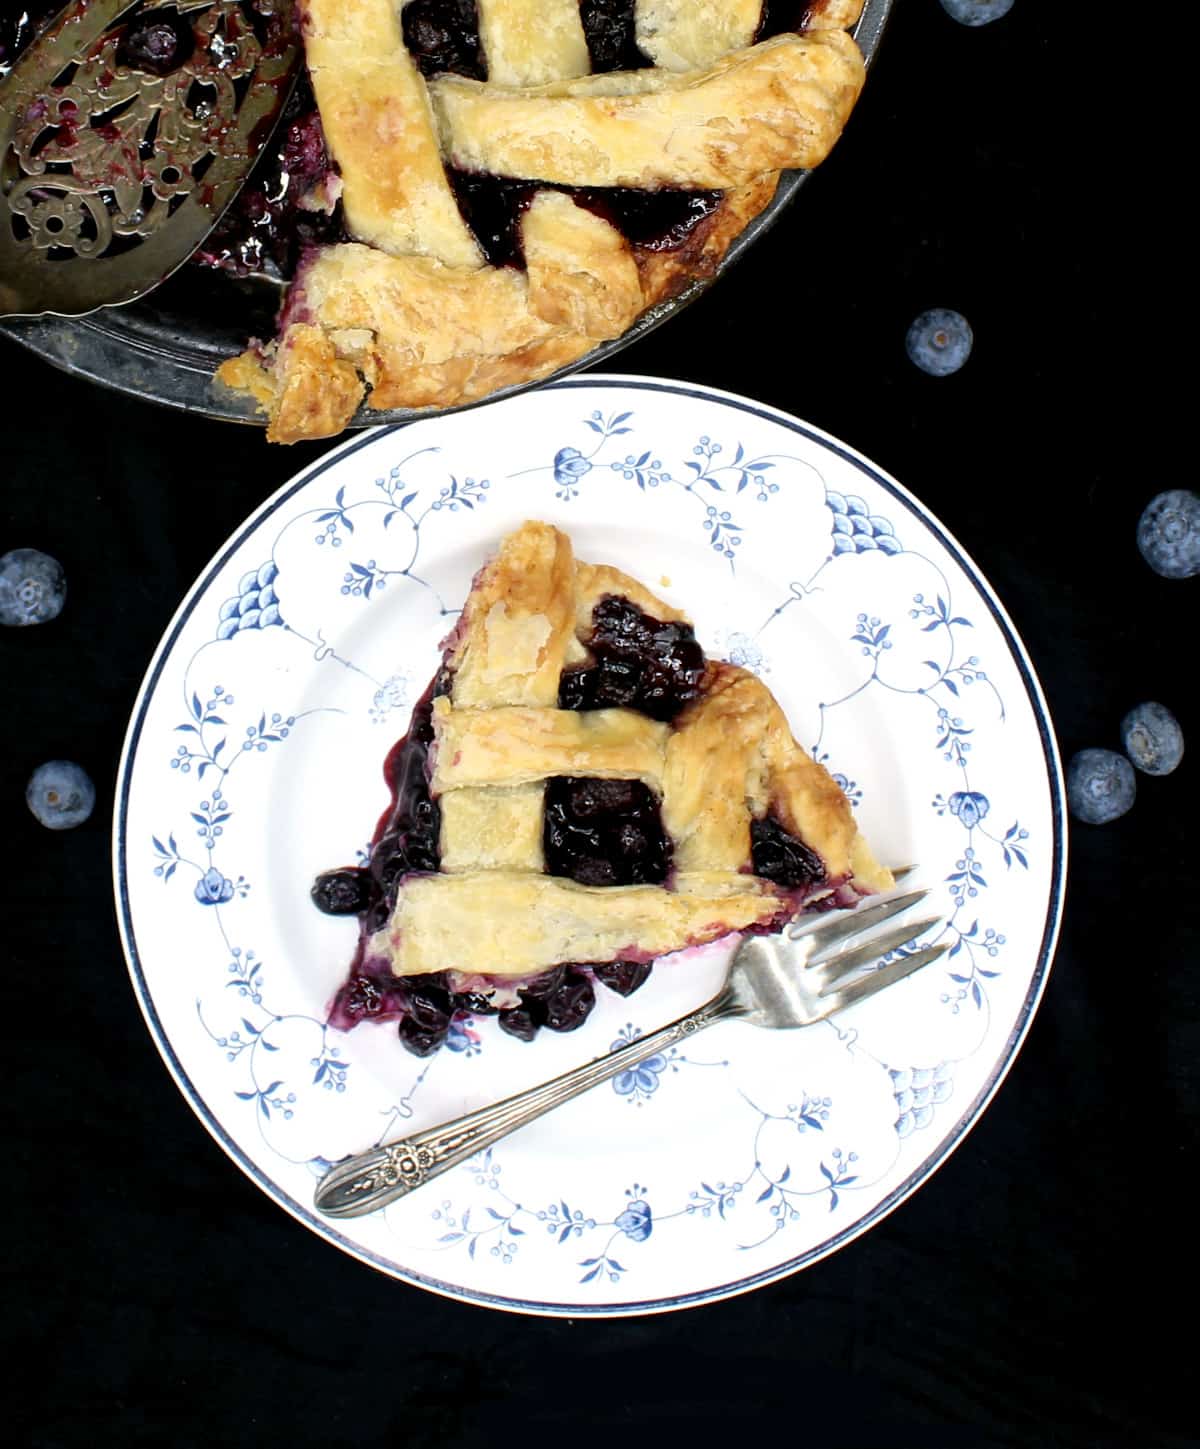 A slice of vegan blueberry pie on a blue and white china plate with a delicate floral pattern and a silver fork with the whole pie next to it and blueberries scattered around.